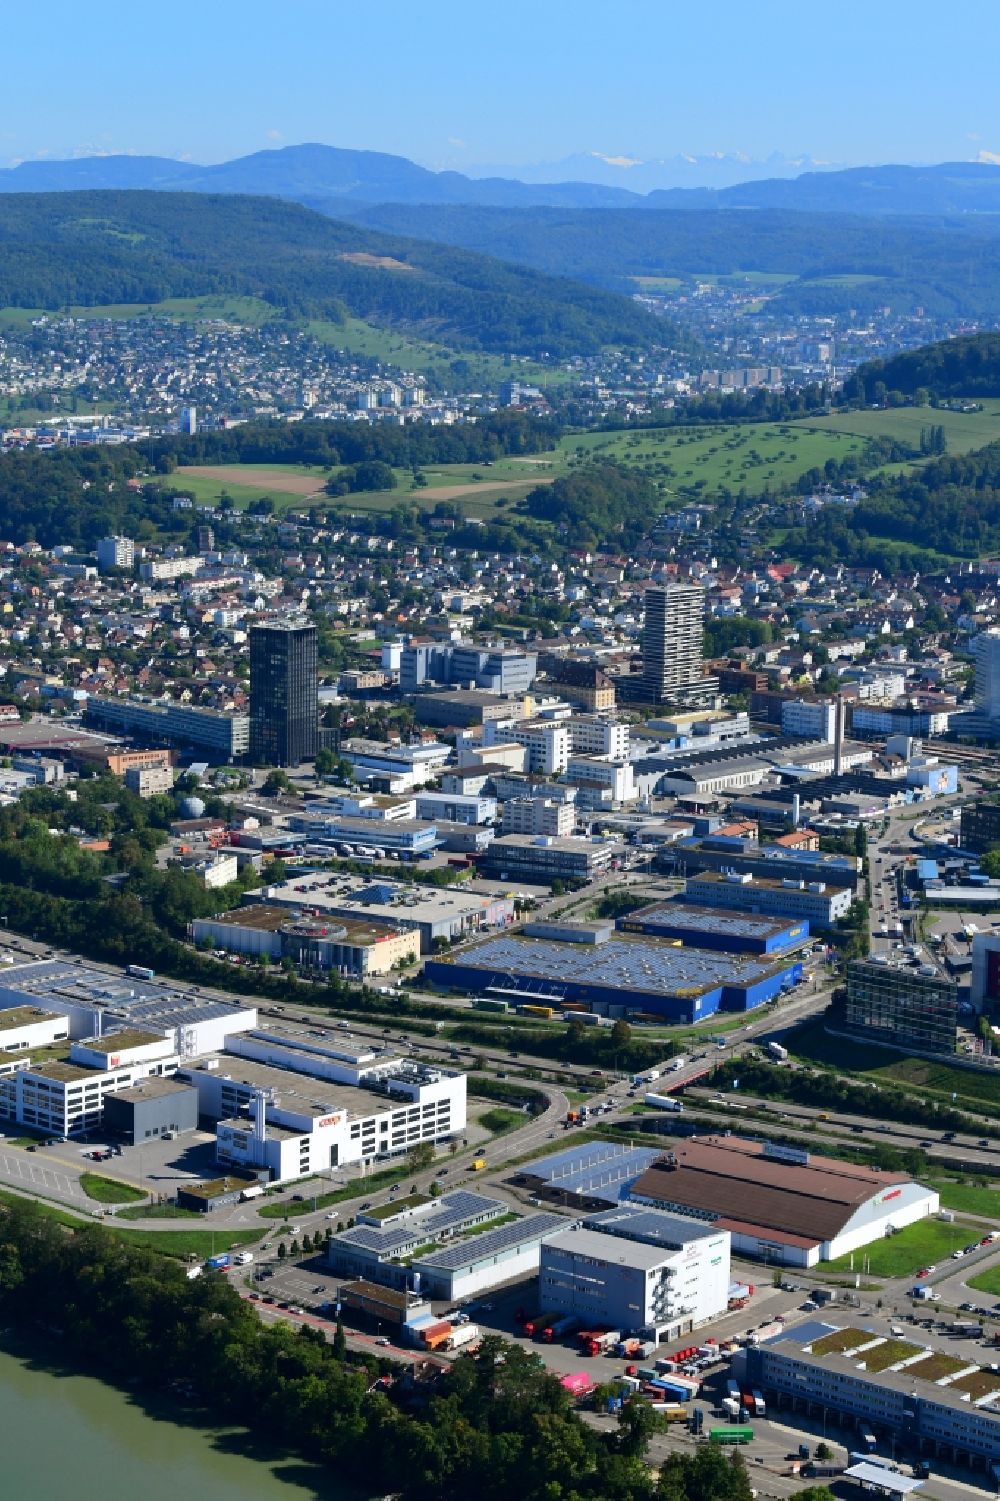 Aerial image Pratteln - City view on down town and industrial area in Pratteln in the canton Basel-Landschaft, Switzerland